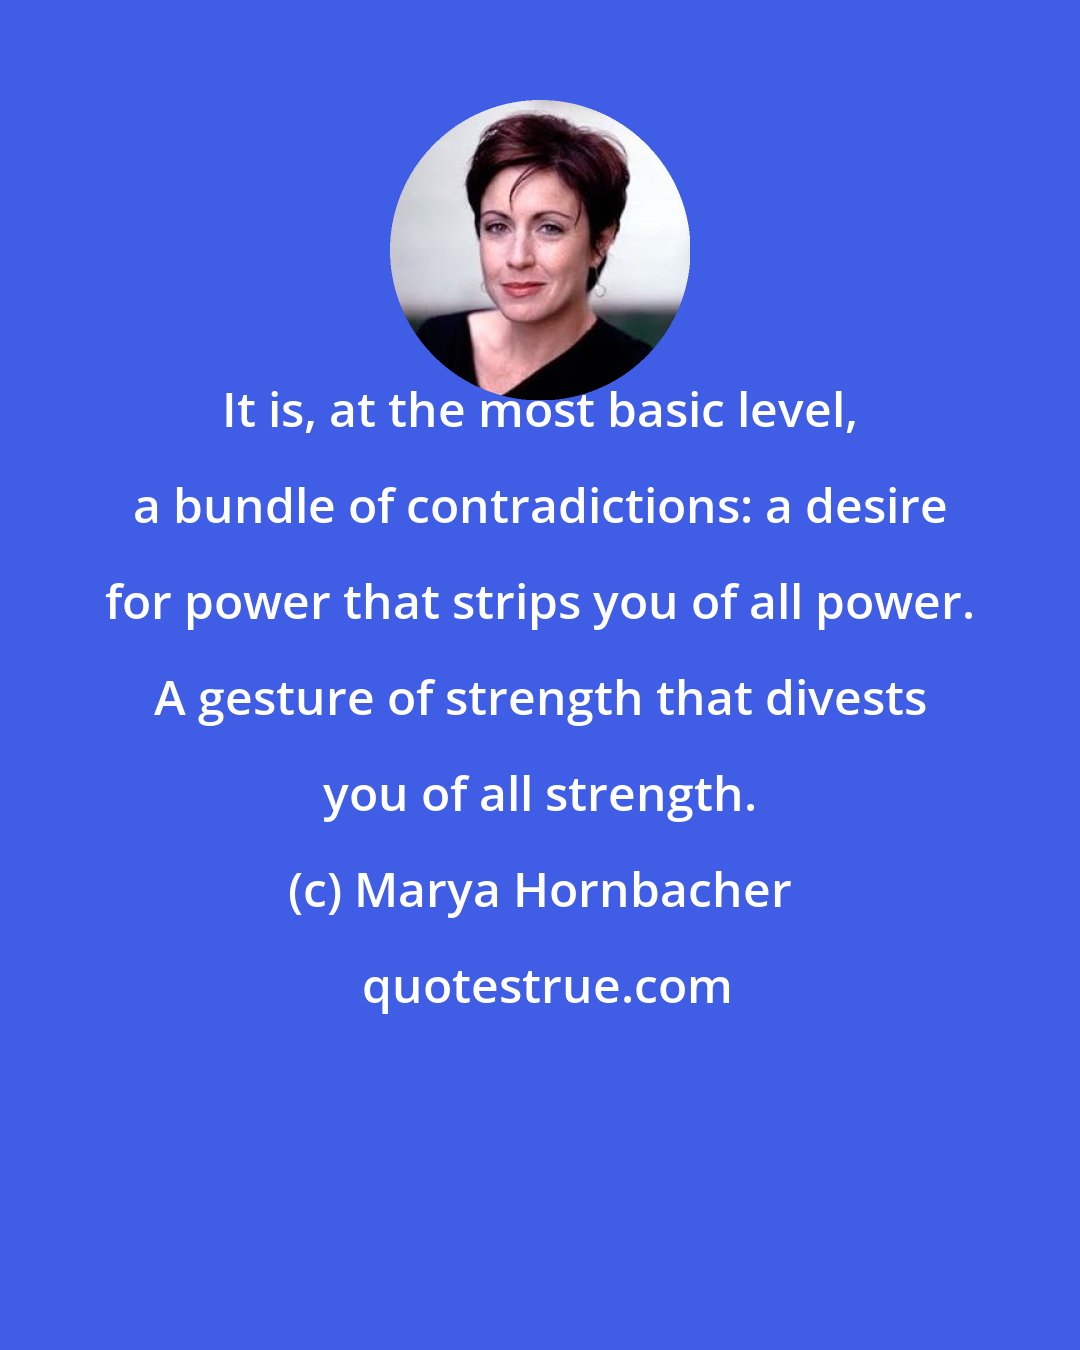 Marya Hornbacher: It is, at the most basic level, a bundle of contradictions: a desire for power that strips you of all power. A gesture of strength that divests you of all strength.